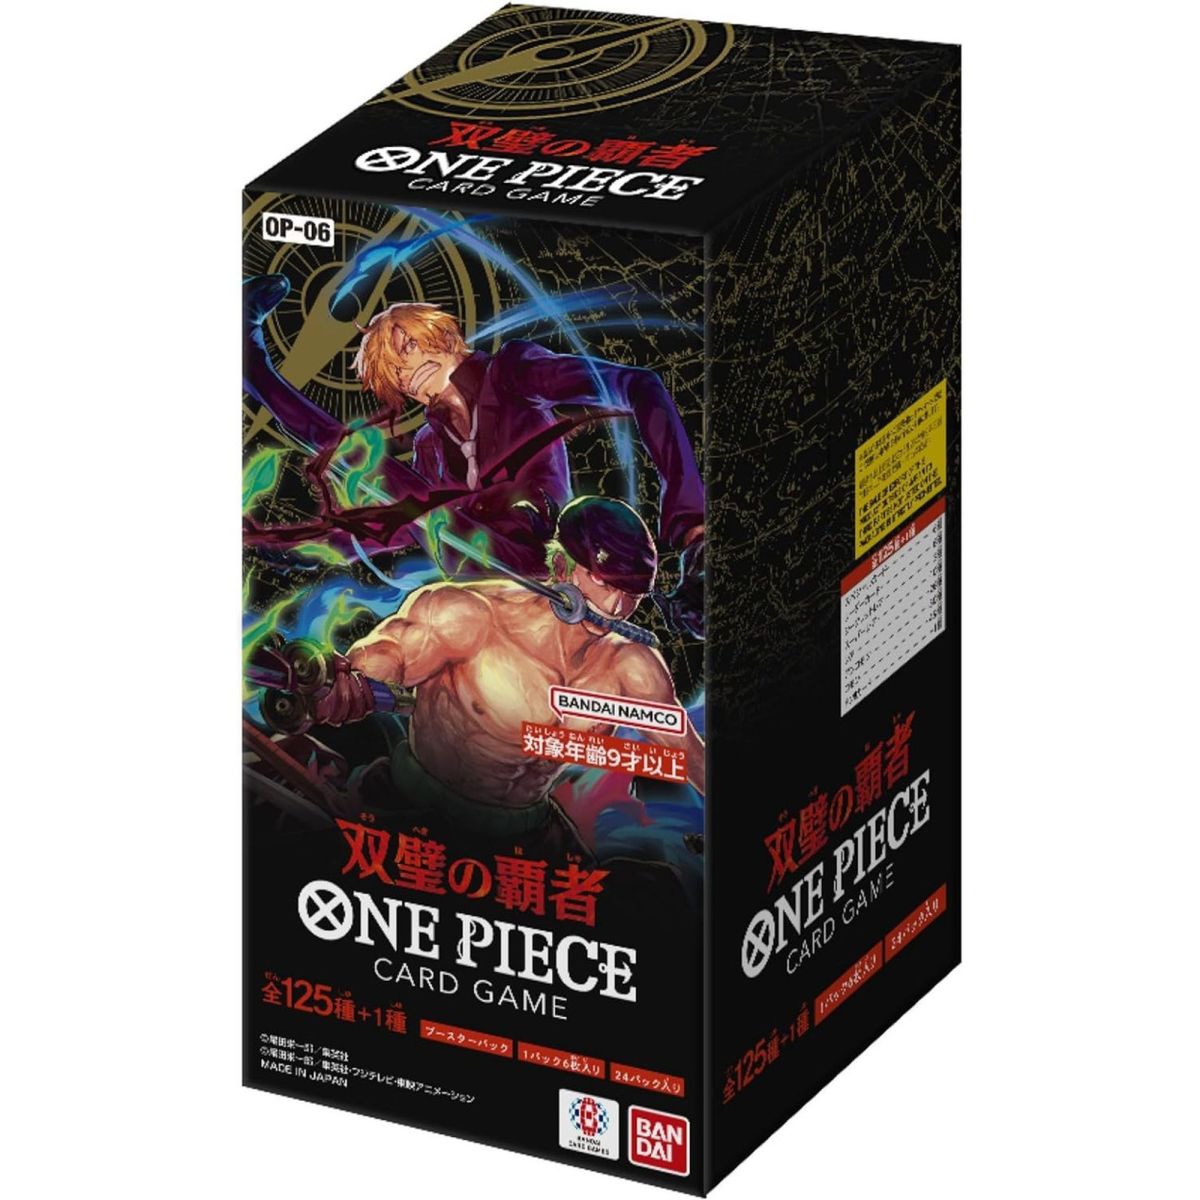 One Piece CG - Display - Box of 24 Boosters - Wings of Captain - OP-06 - JP